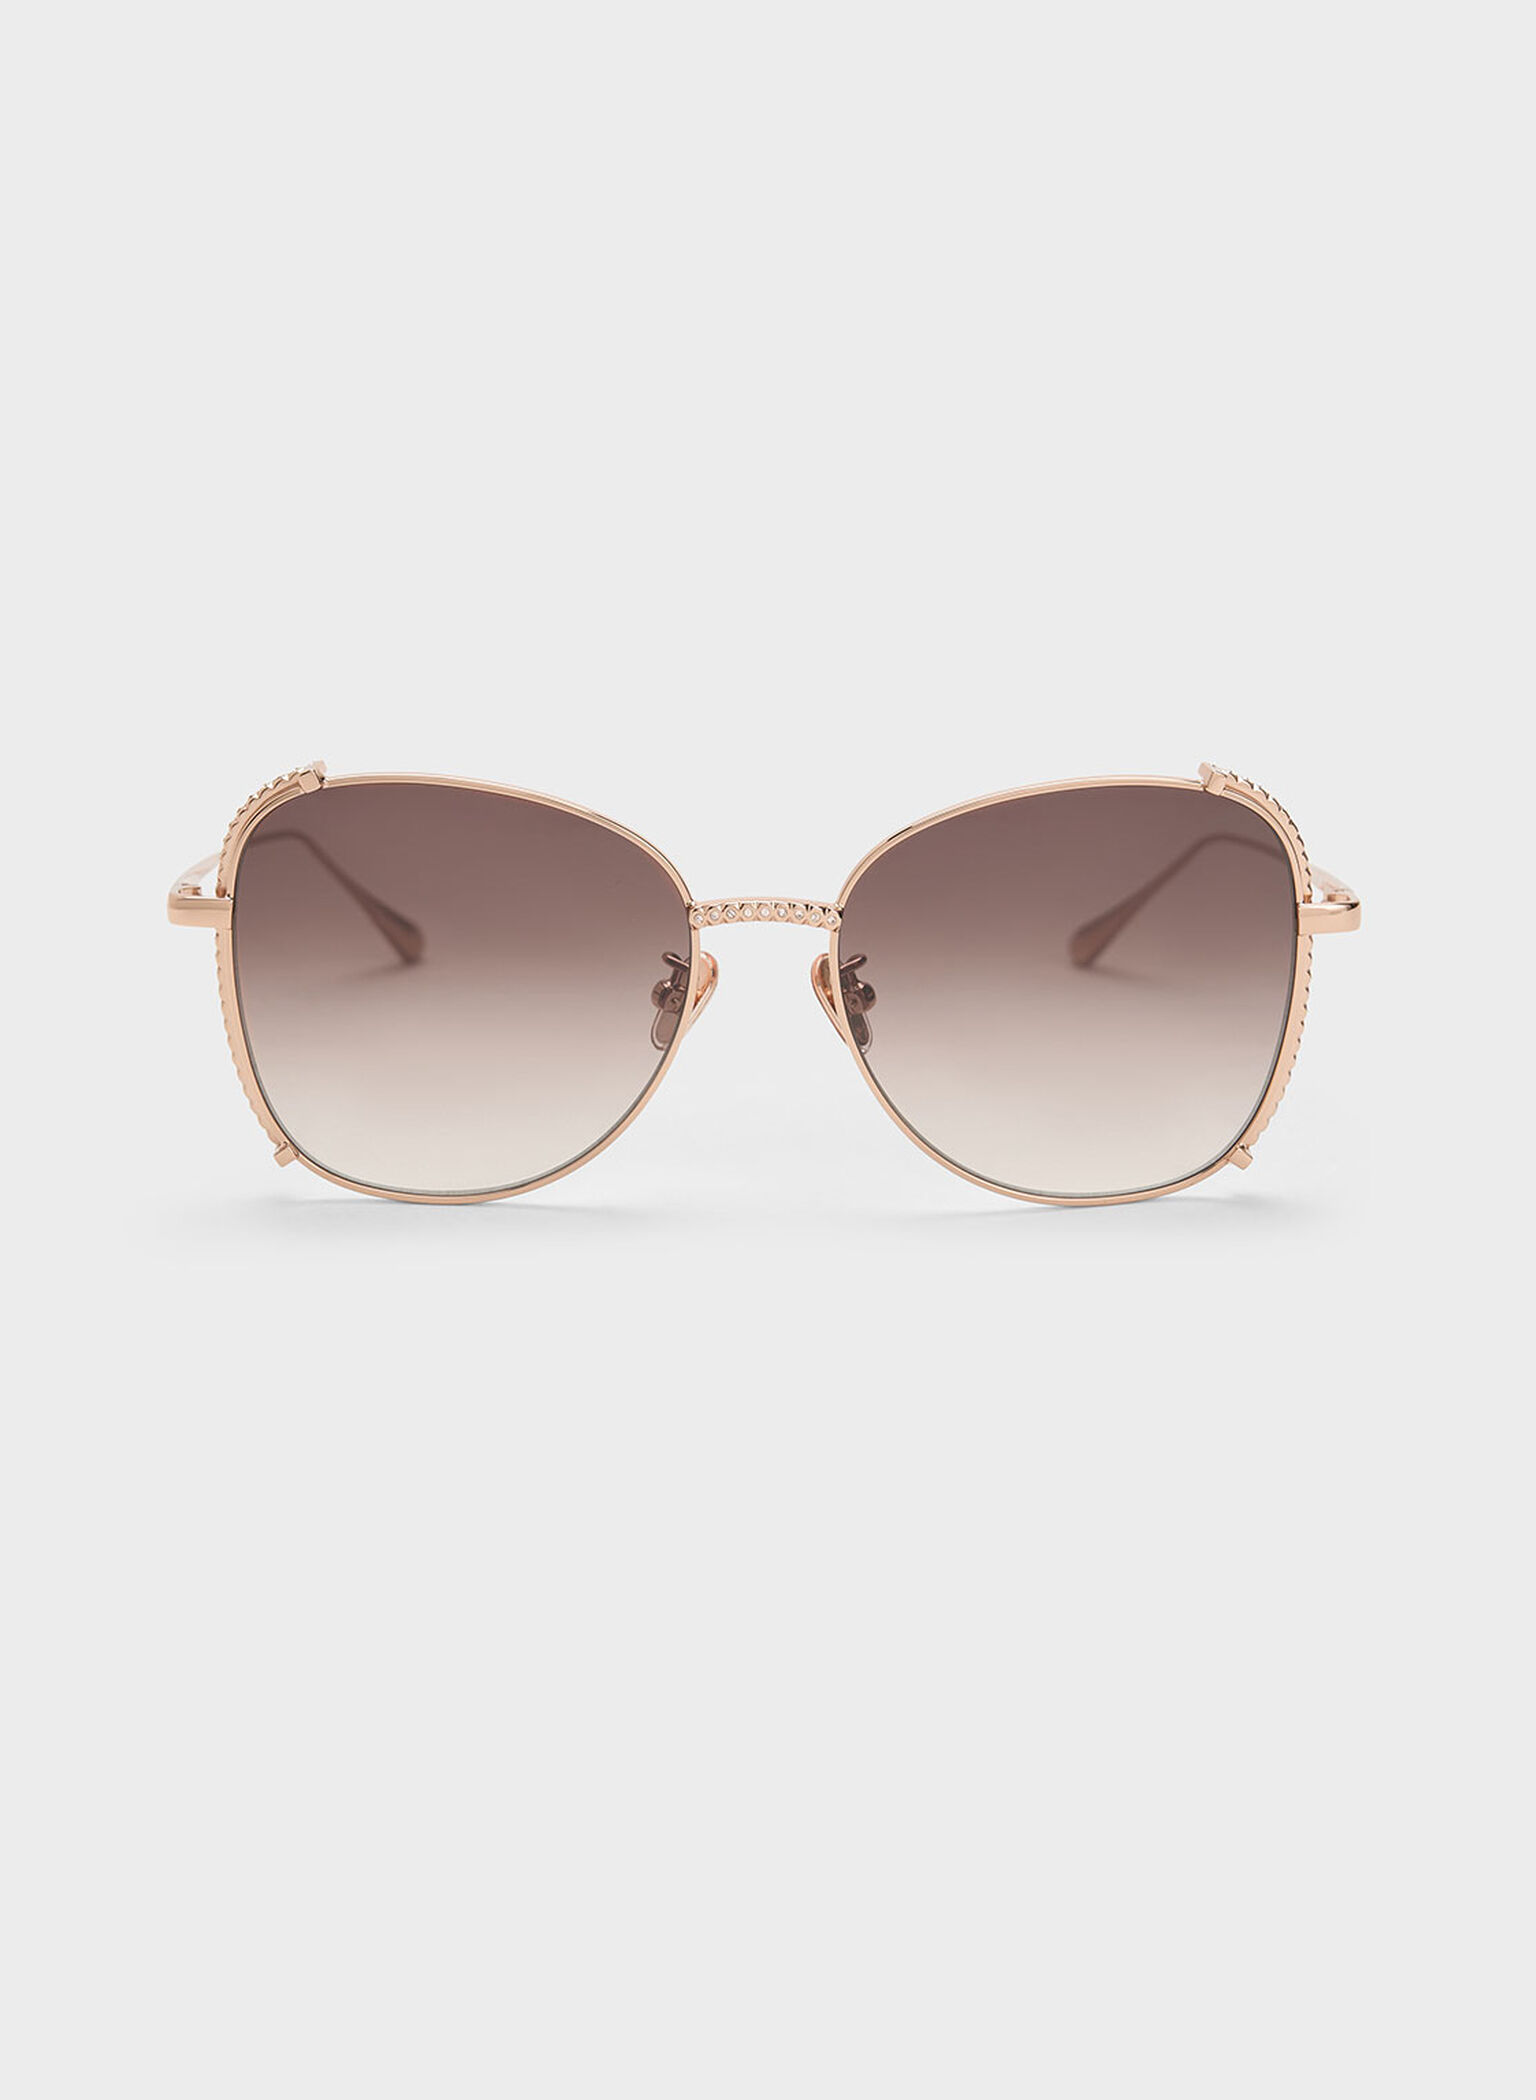 Charles & Keith - Women's Embellished Half-Frame Butterfly Sunglasses, Rose Gold, R